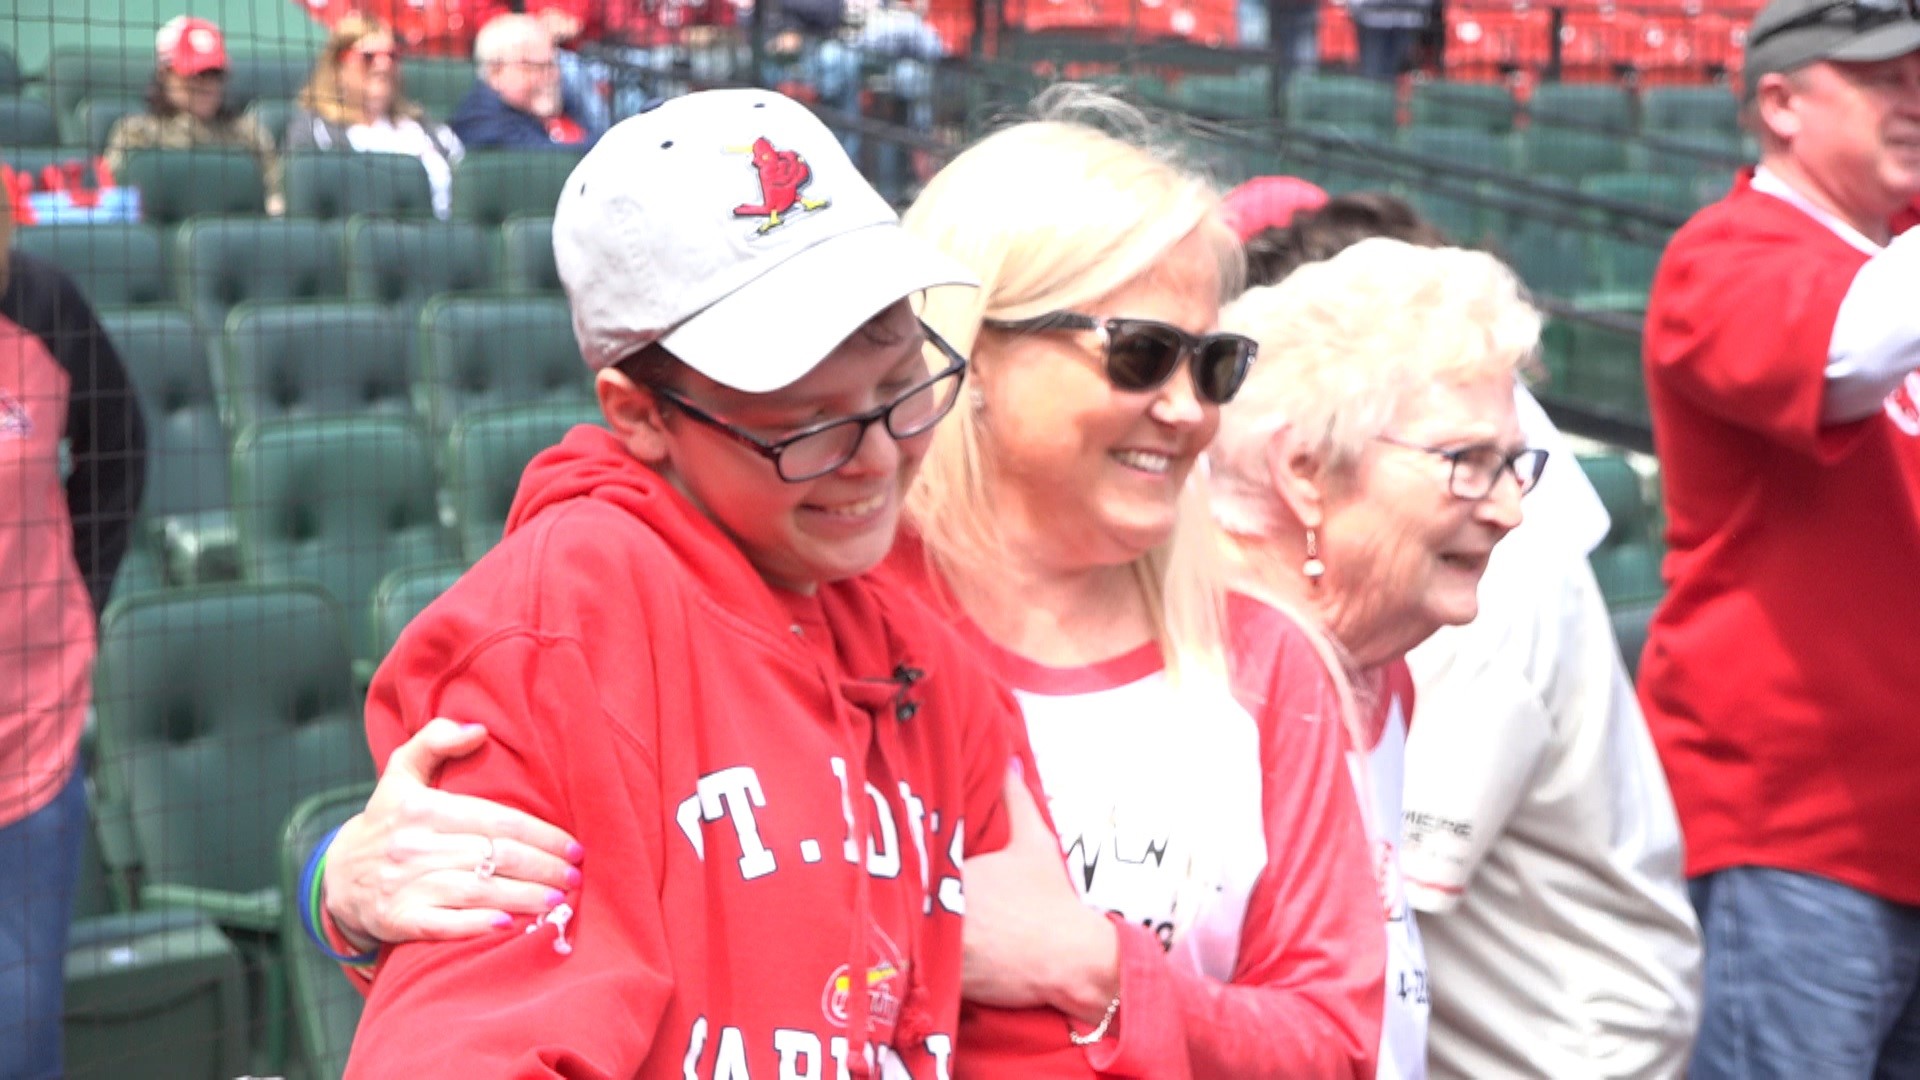 Both Dylan and Christina Schwartz received heart transplants last year. The Cardinals celebrated them in a great way.